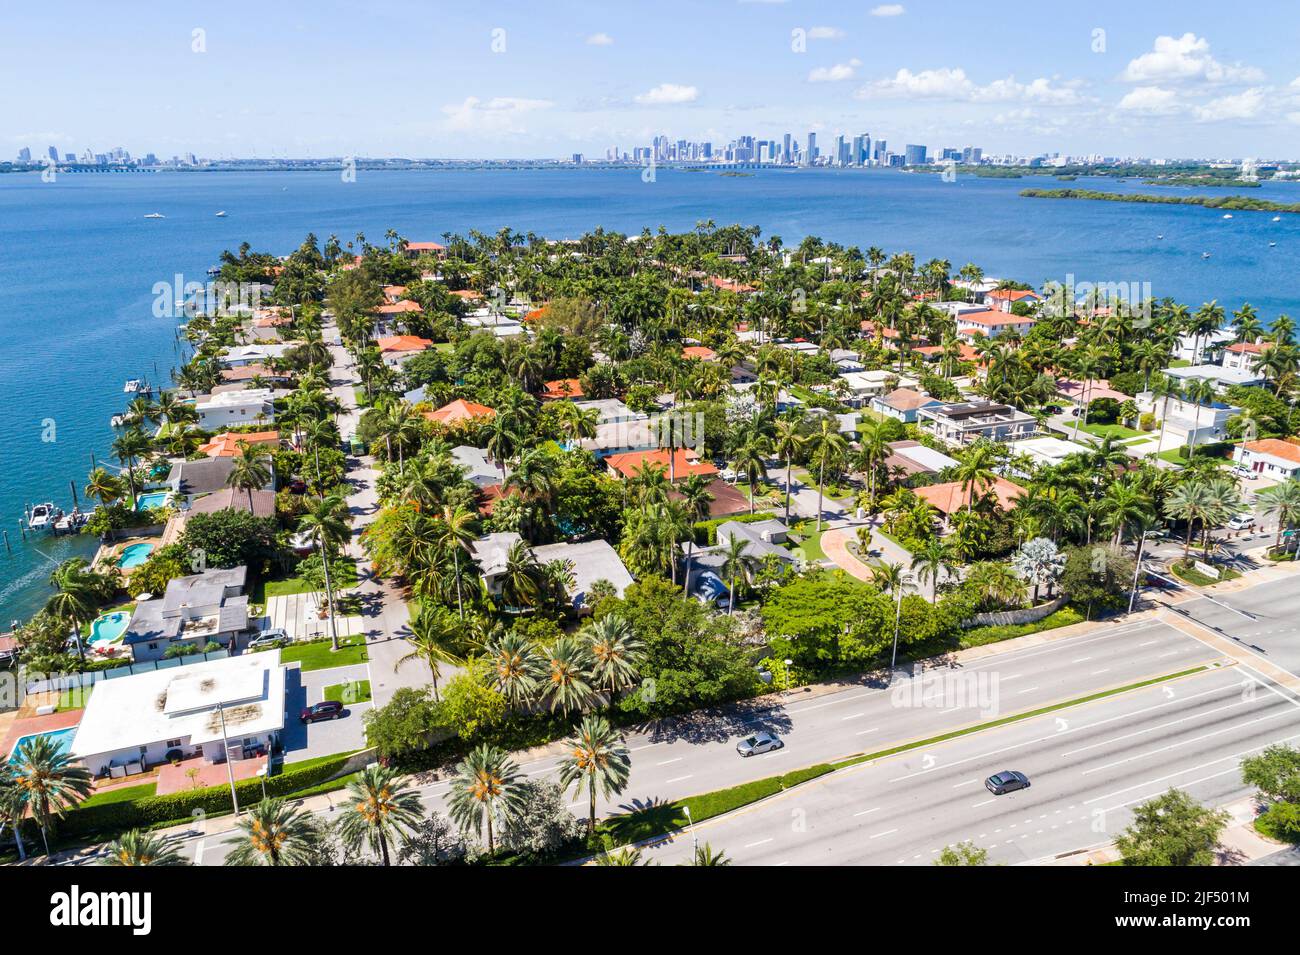 North Bay Village Florida,Miami Biscayne Bay,aerial overhead view from above,79th Street John F Kennedy Causeway North Bay Island neighborhood homes h Stock Photo